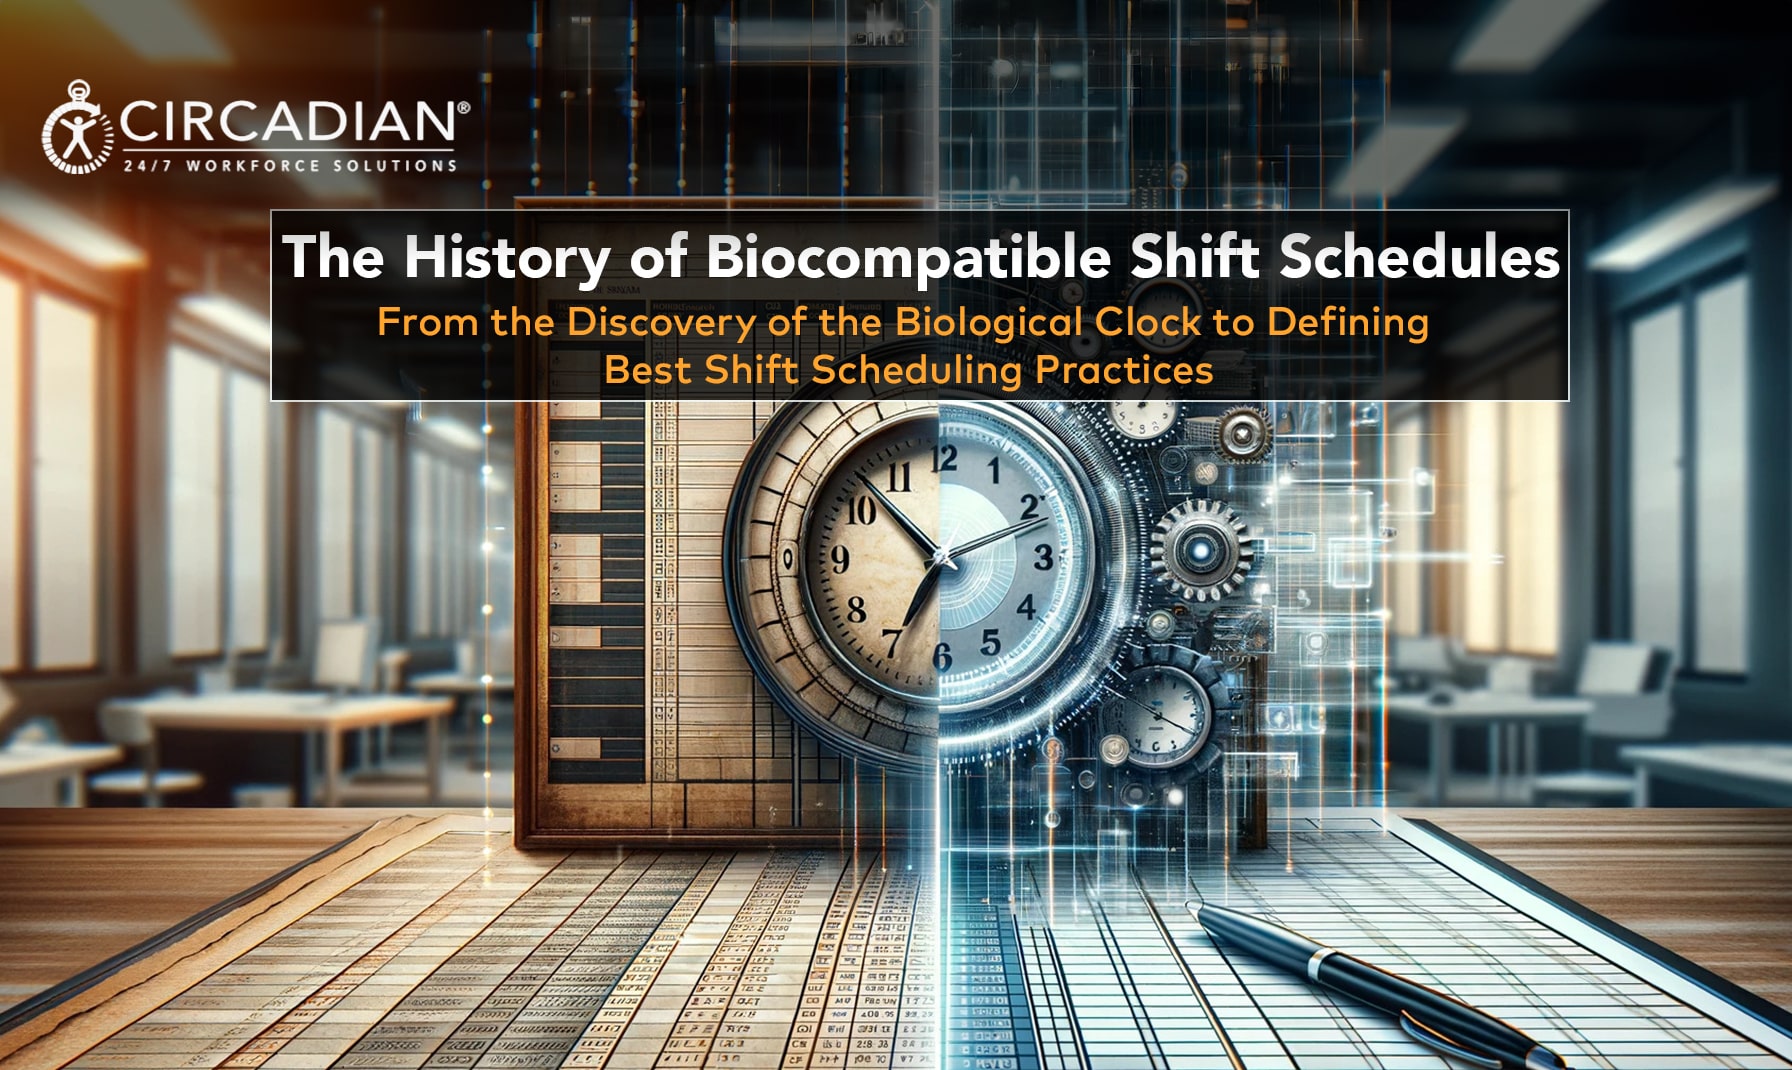 The History of Biocompatible Shift Schedules 